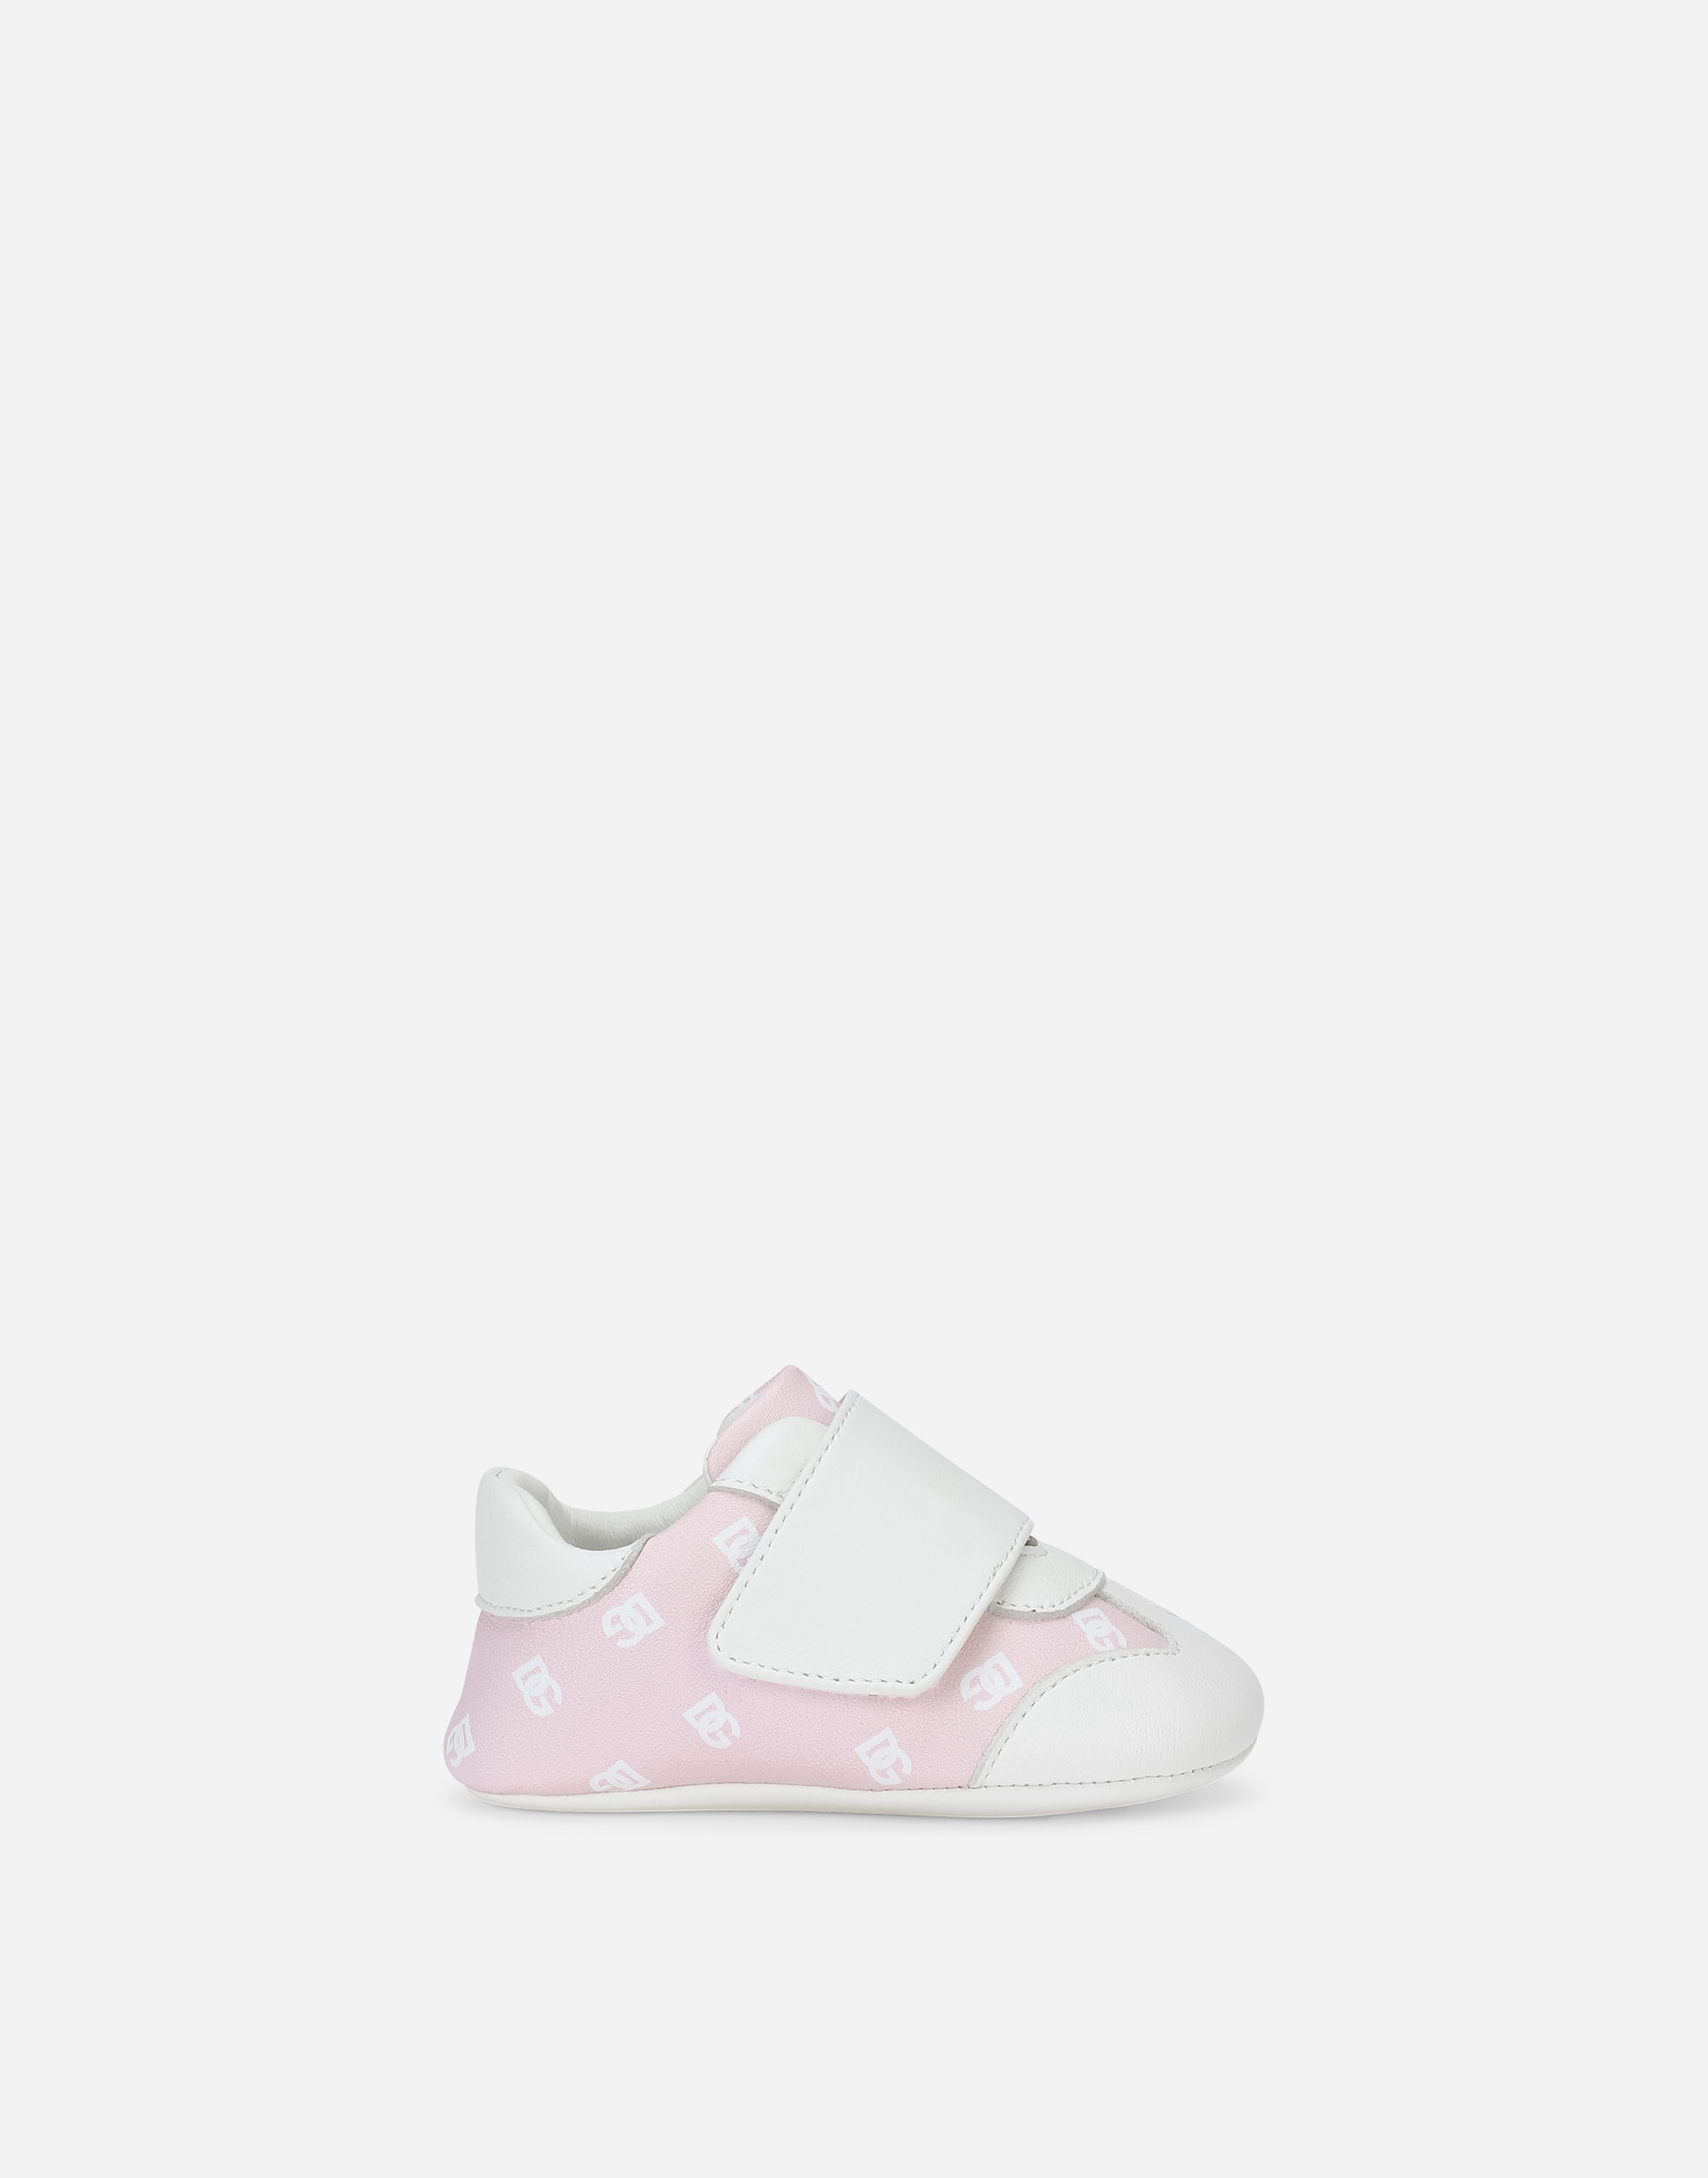 Dolce & Gabbana Babies' Nappa Leather Newborn Trainers With Dg-logo Print In White